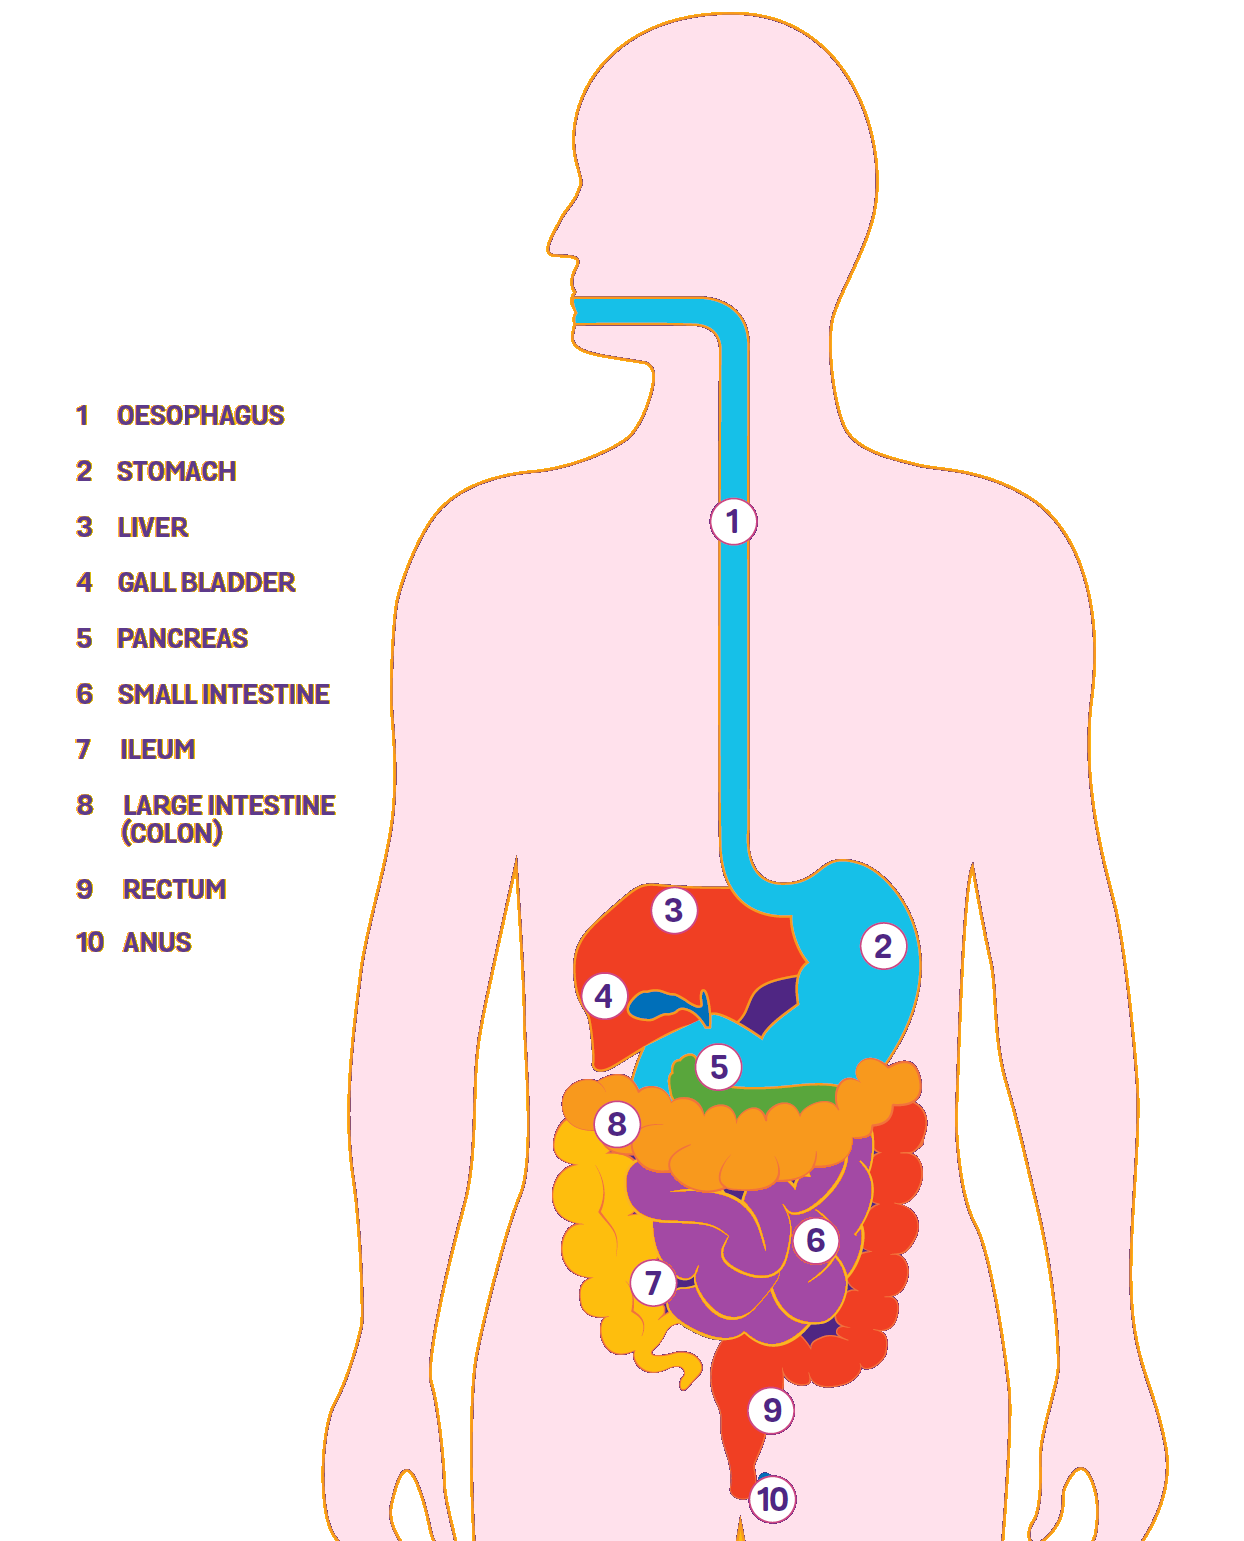 Label Parts Of The Digestive System Labelled Diagram | Images and ...